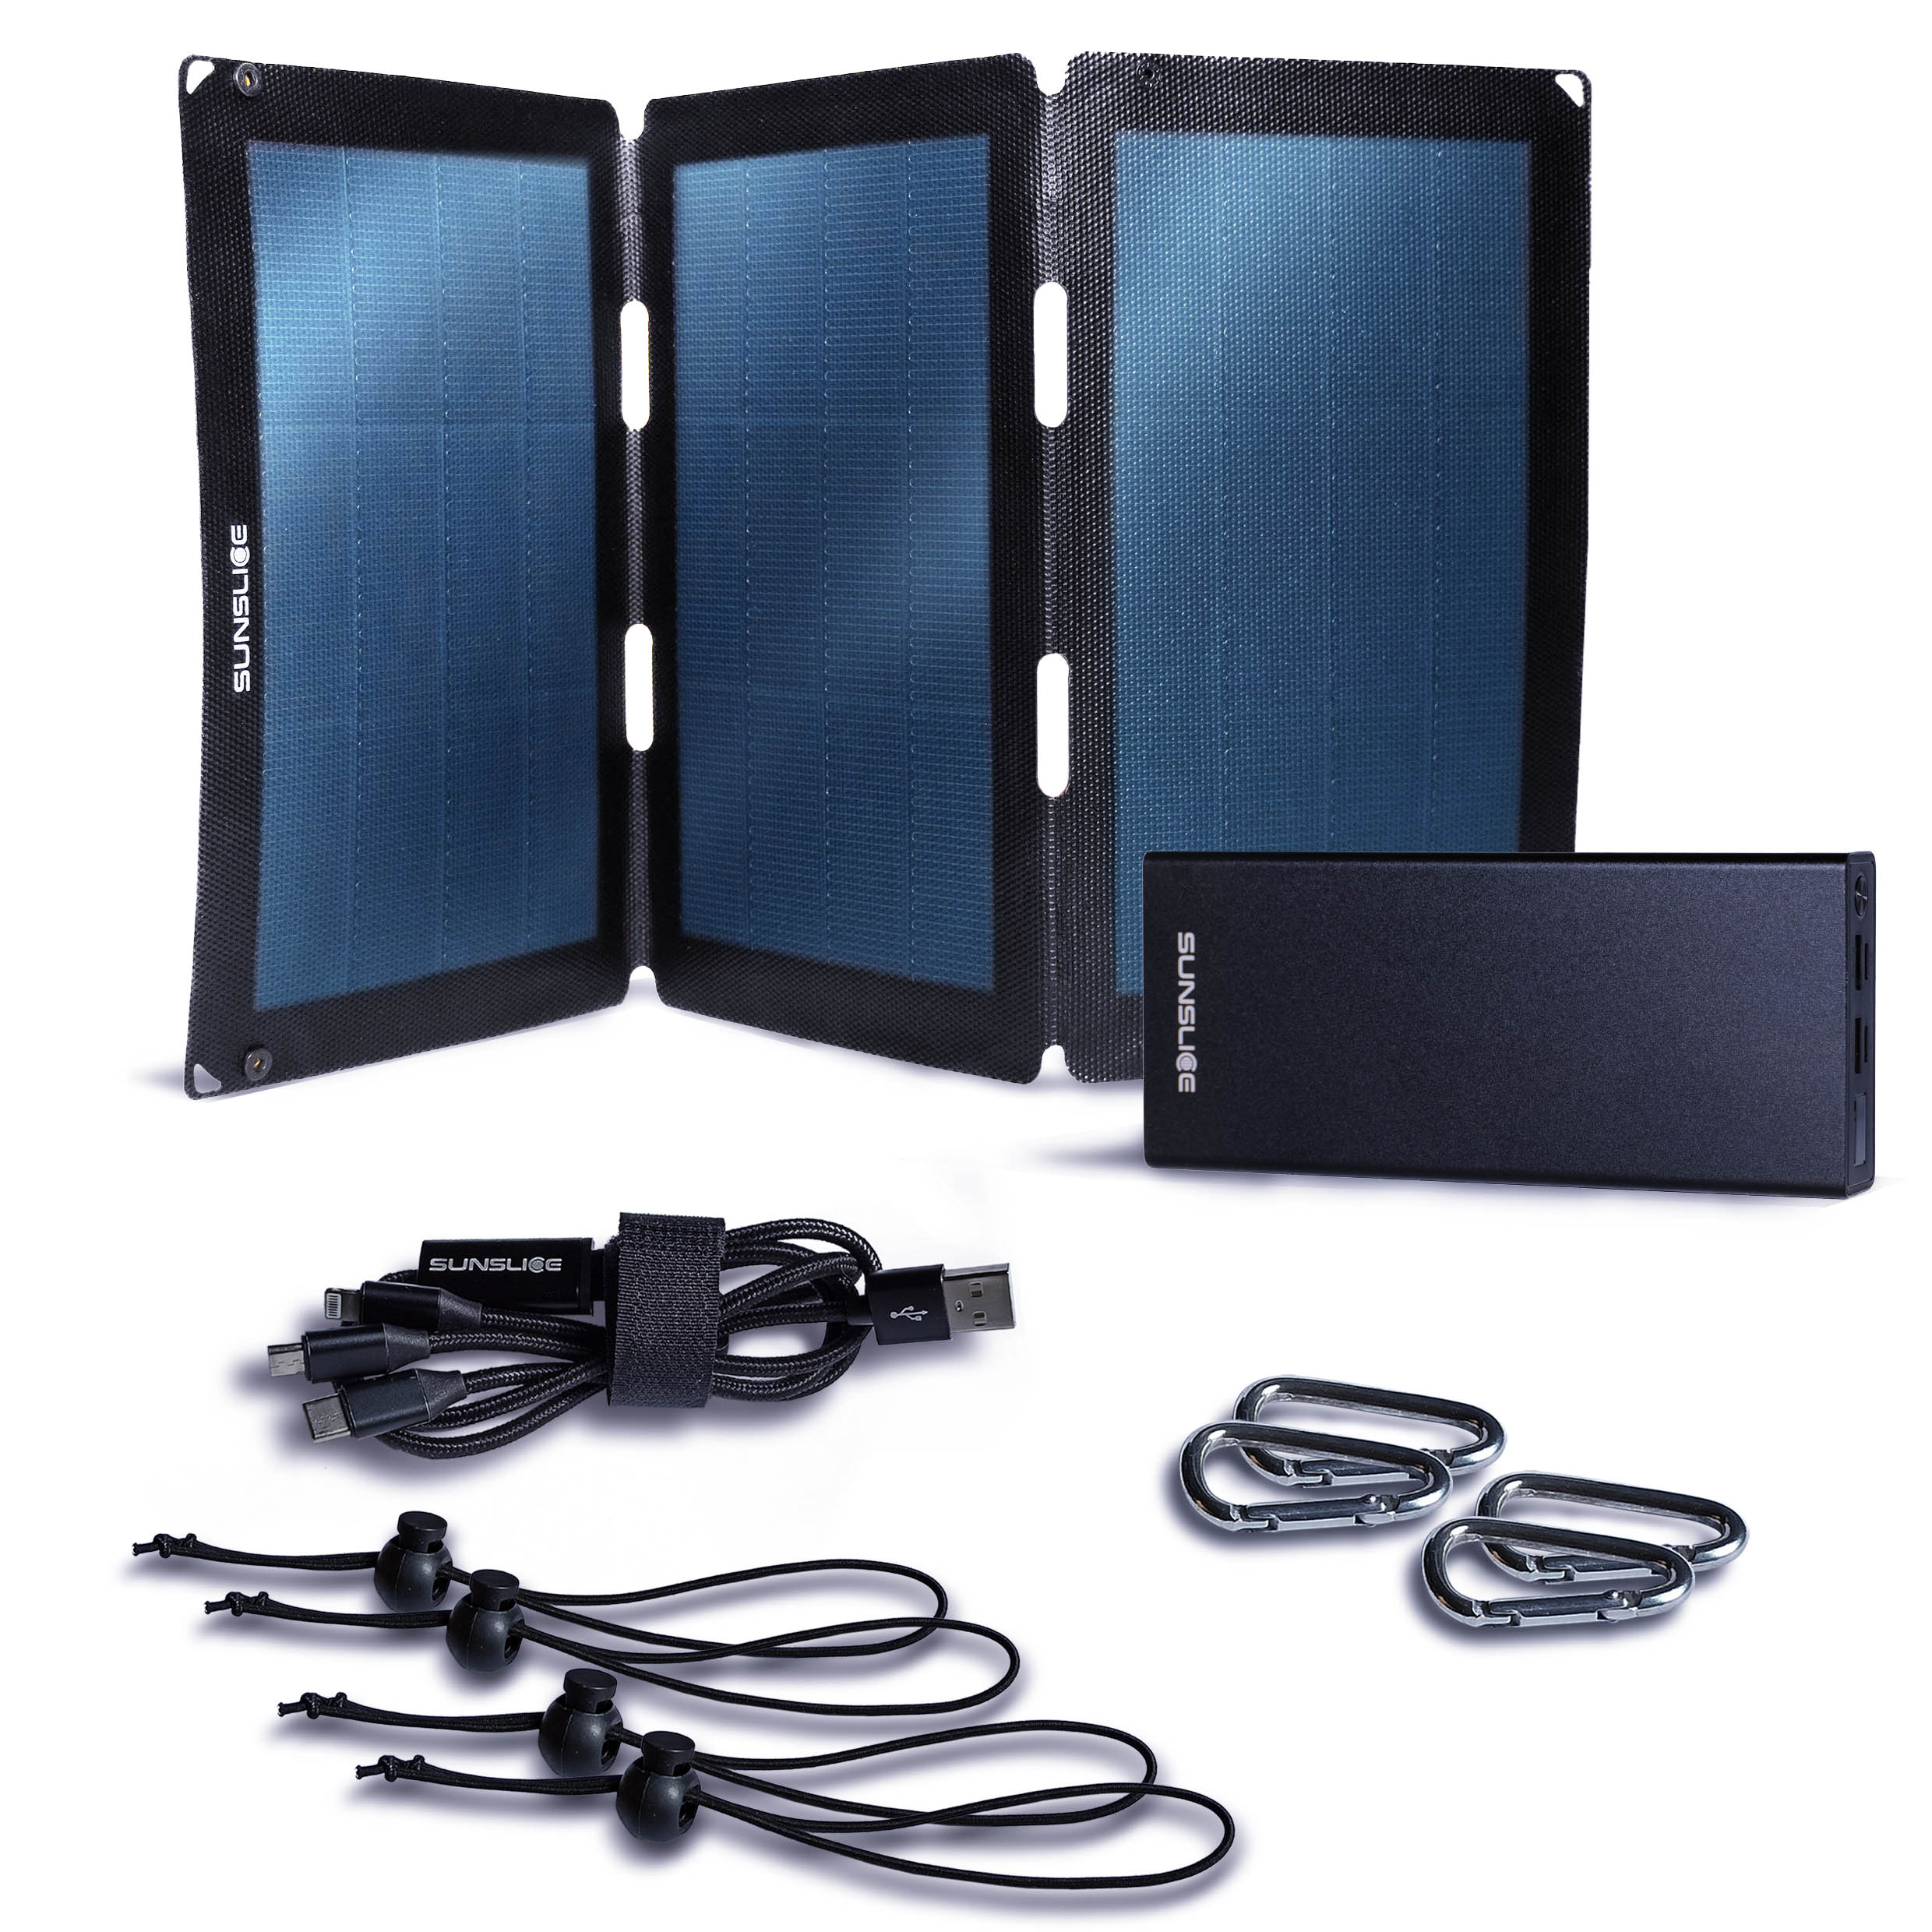 sunslice solar kit for hiking and camping with portable 6 watt solar panel and 5000mAh power bank 